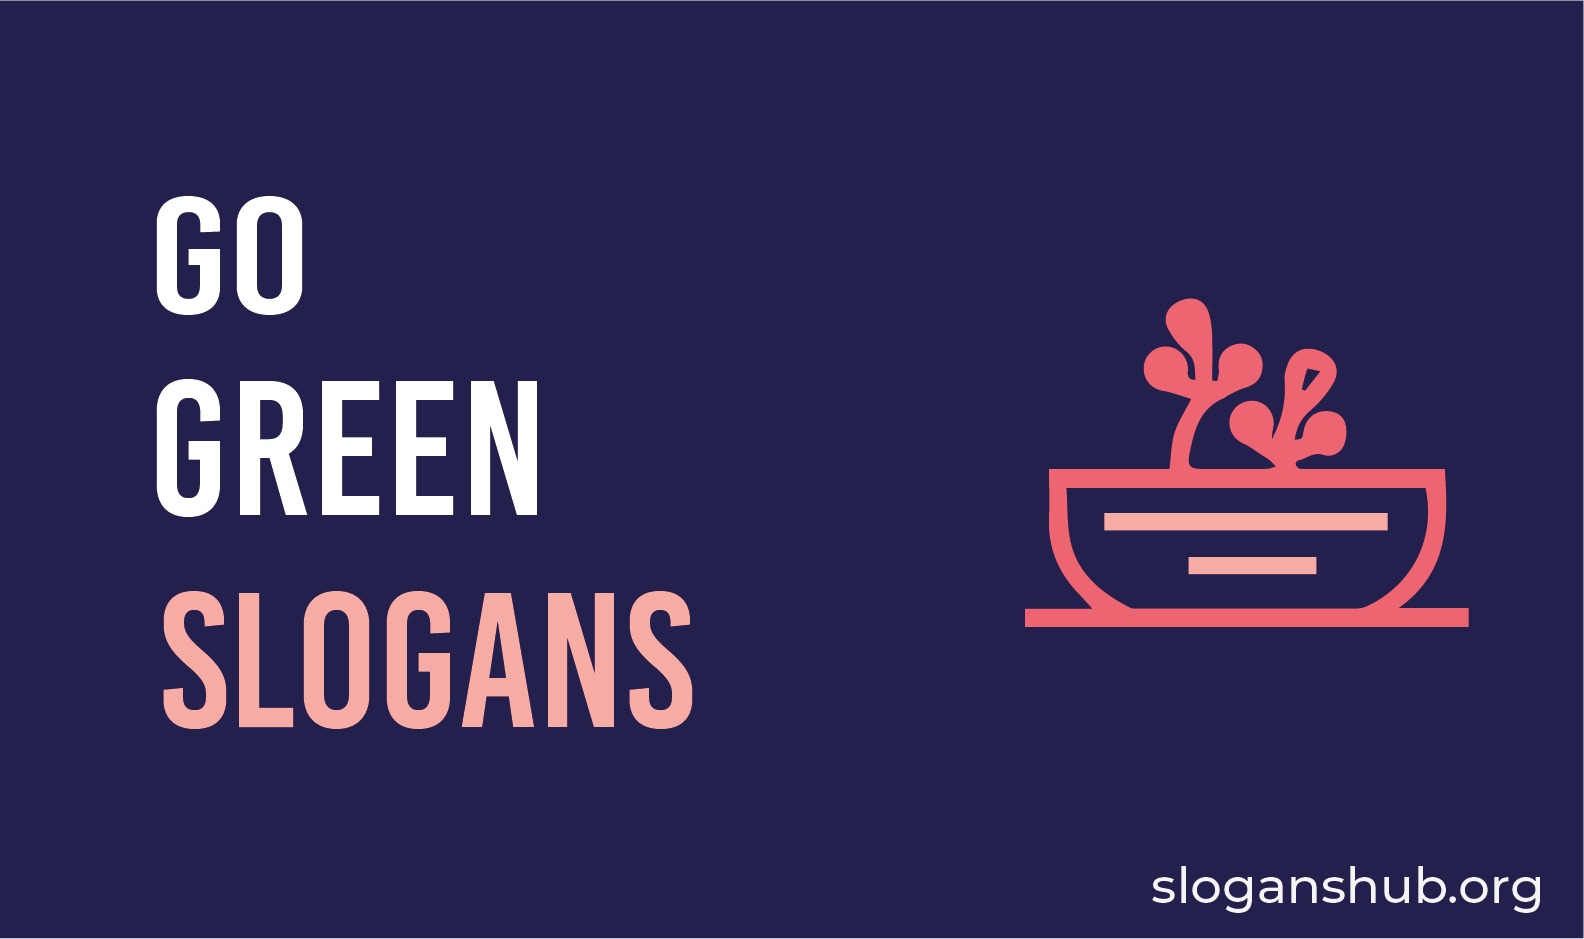 75 Catchy Go Green Slogans With Pictures and Posters